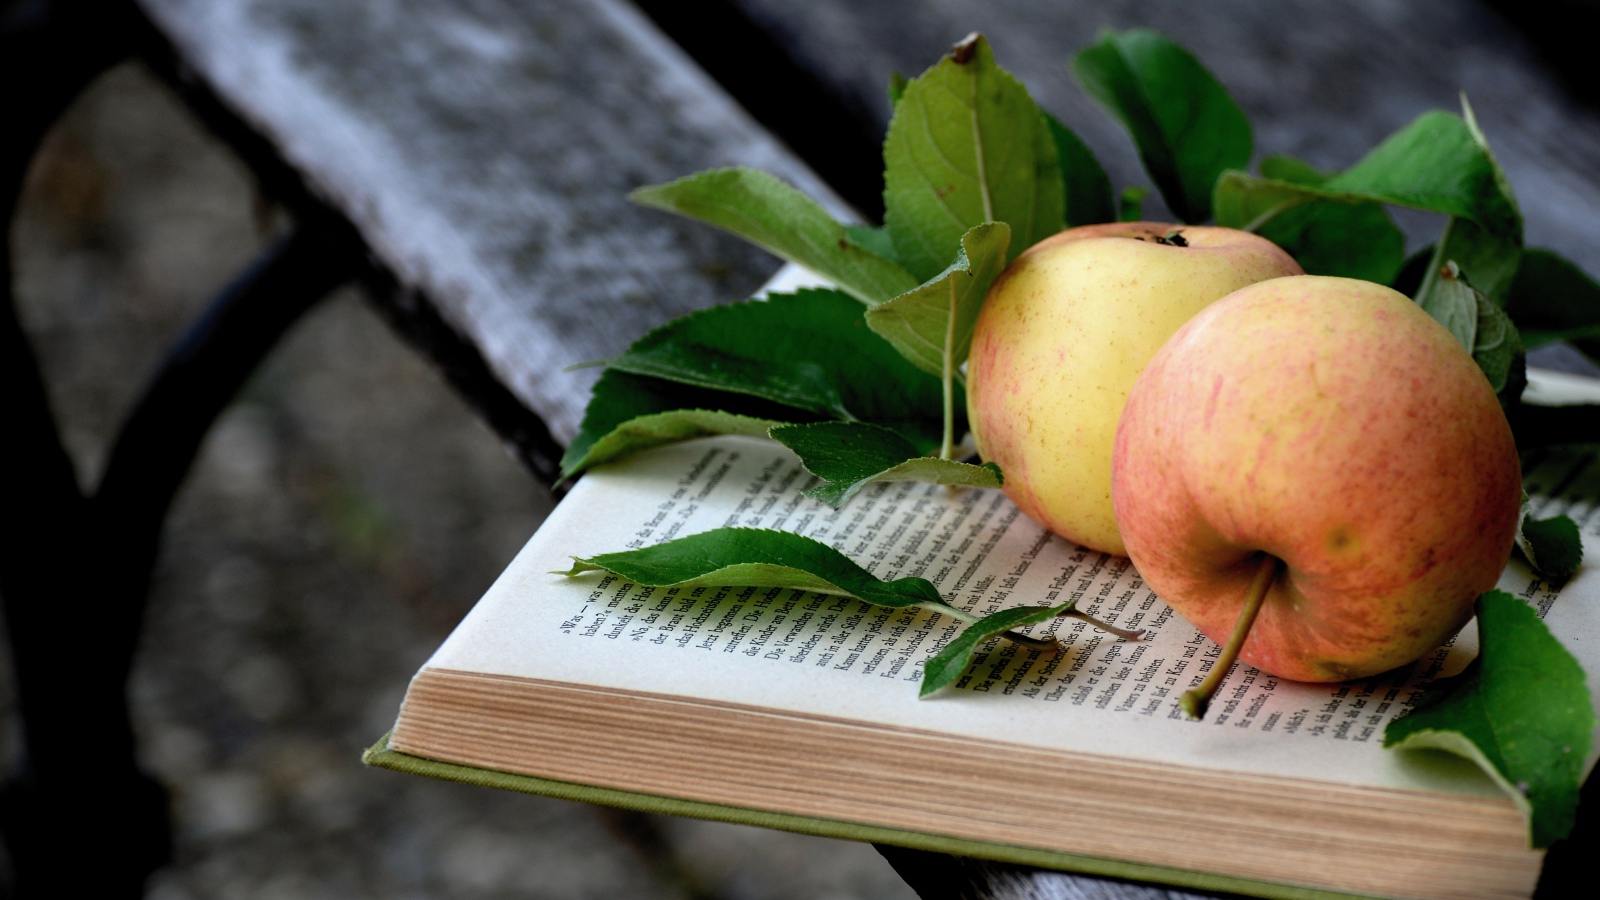 Two apples with green leaves on a book